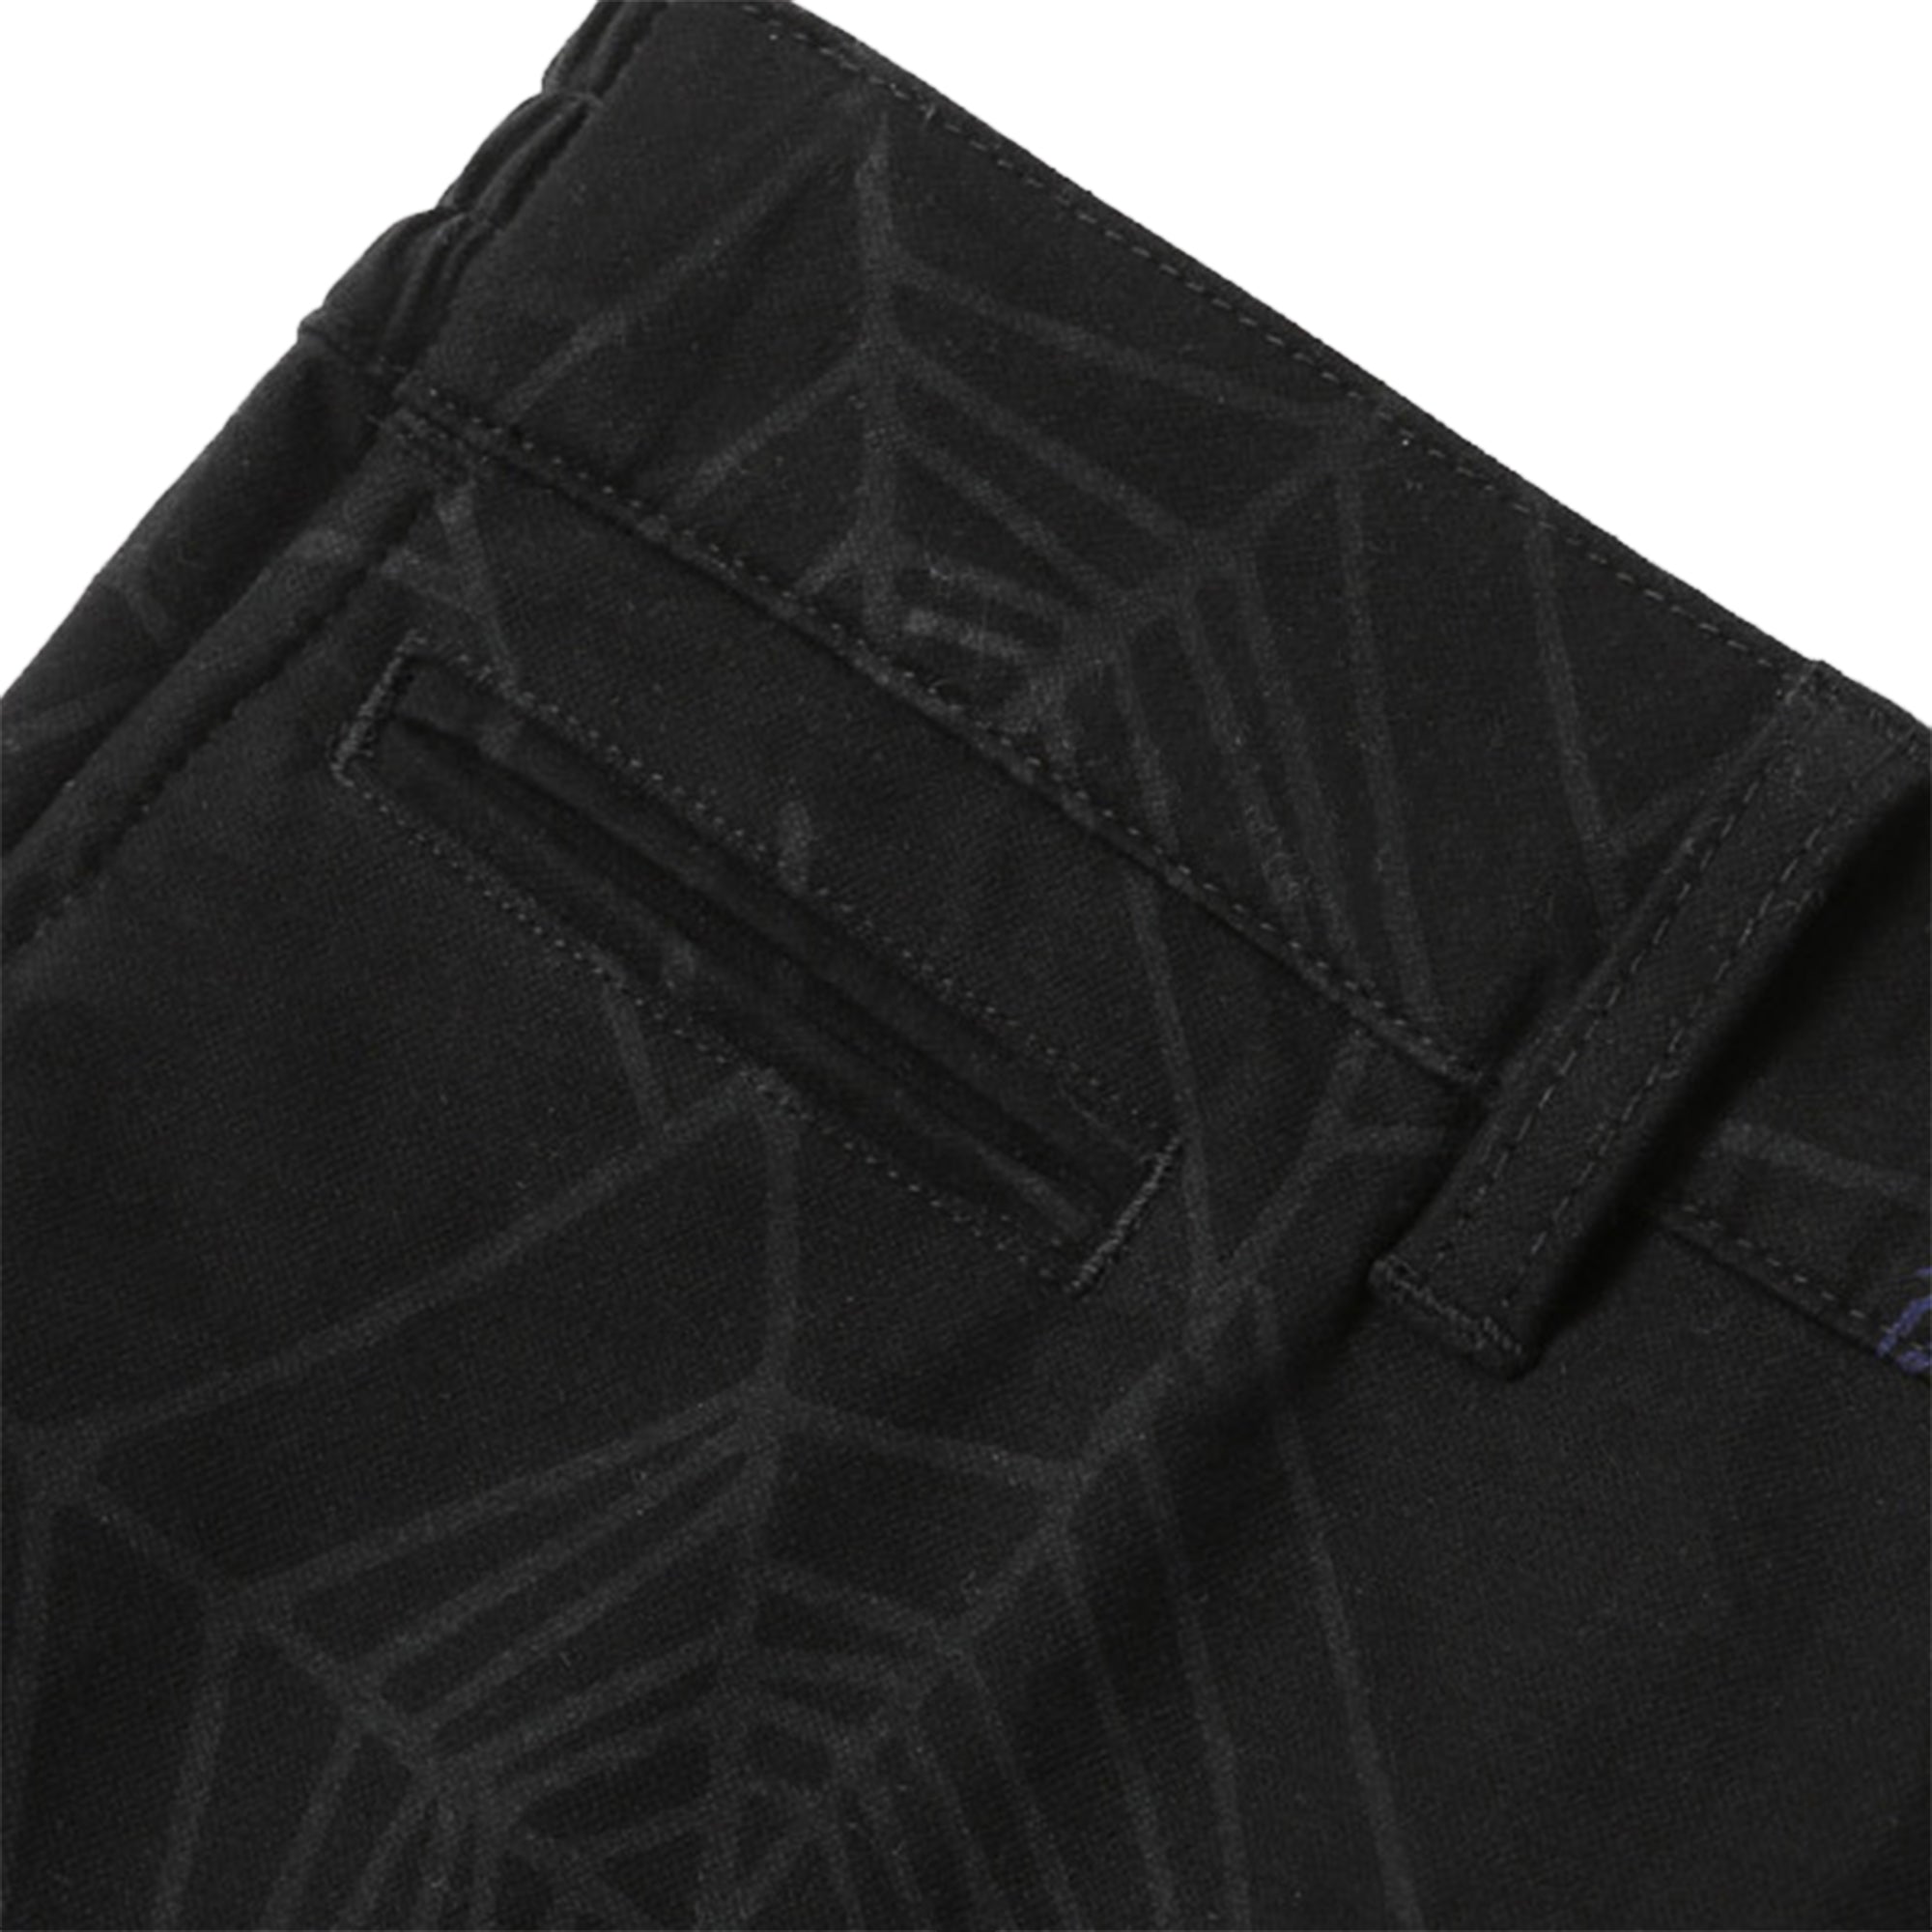 SPIDER WEB TROUSERS - BLACK